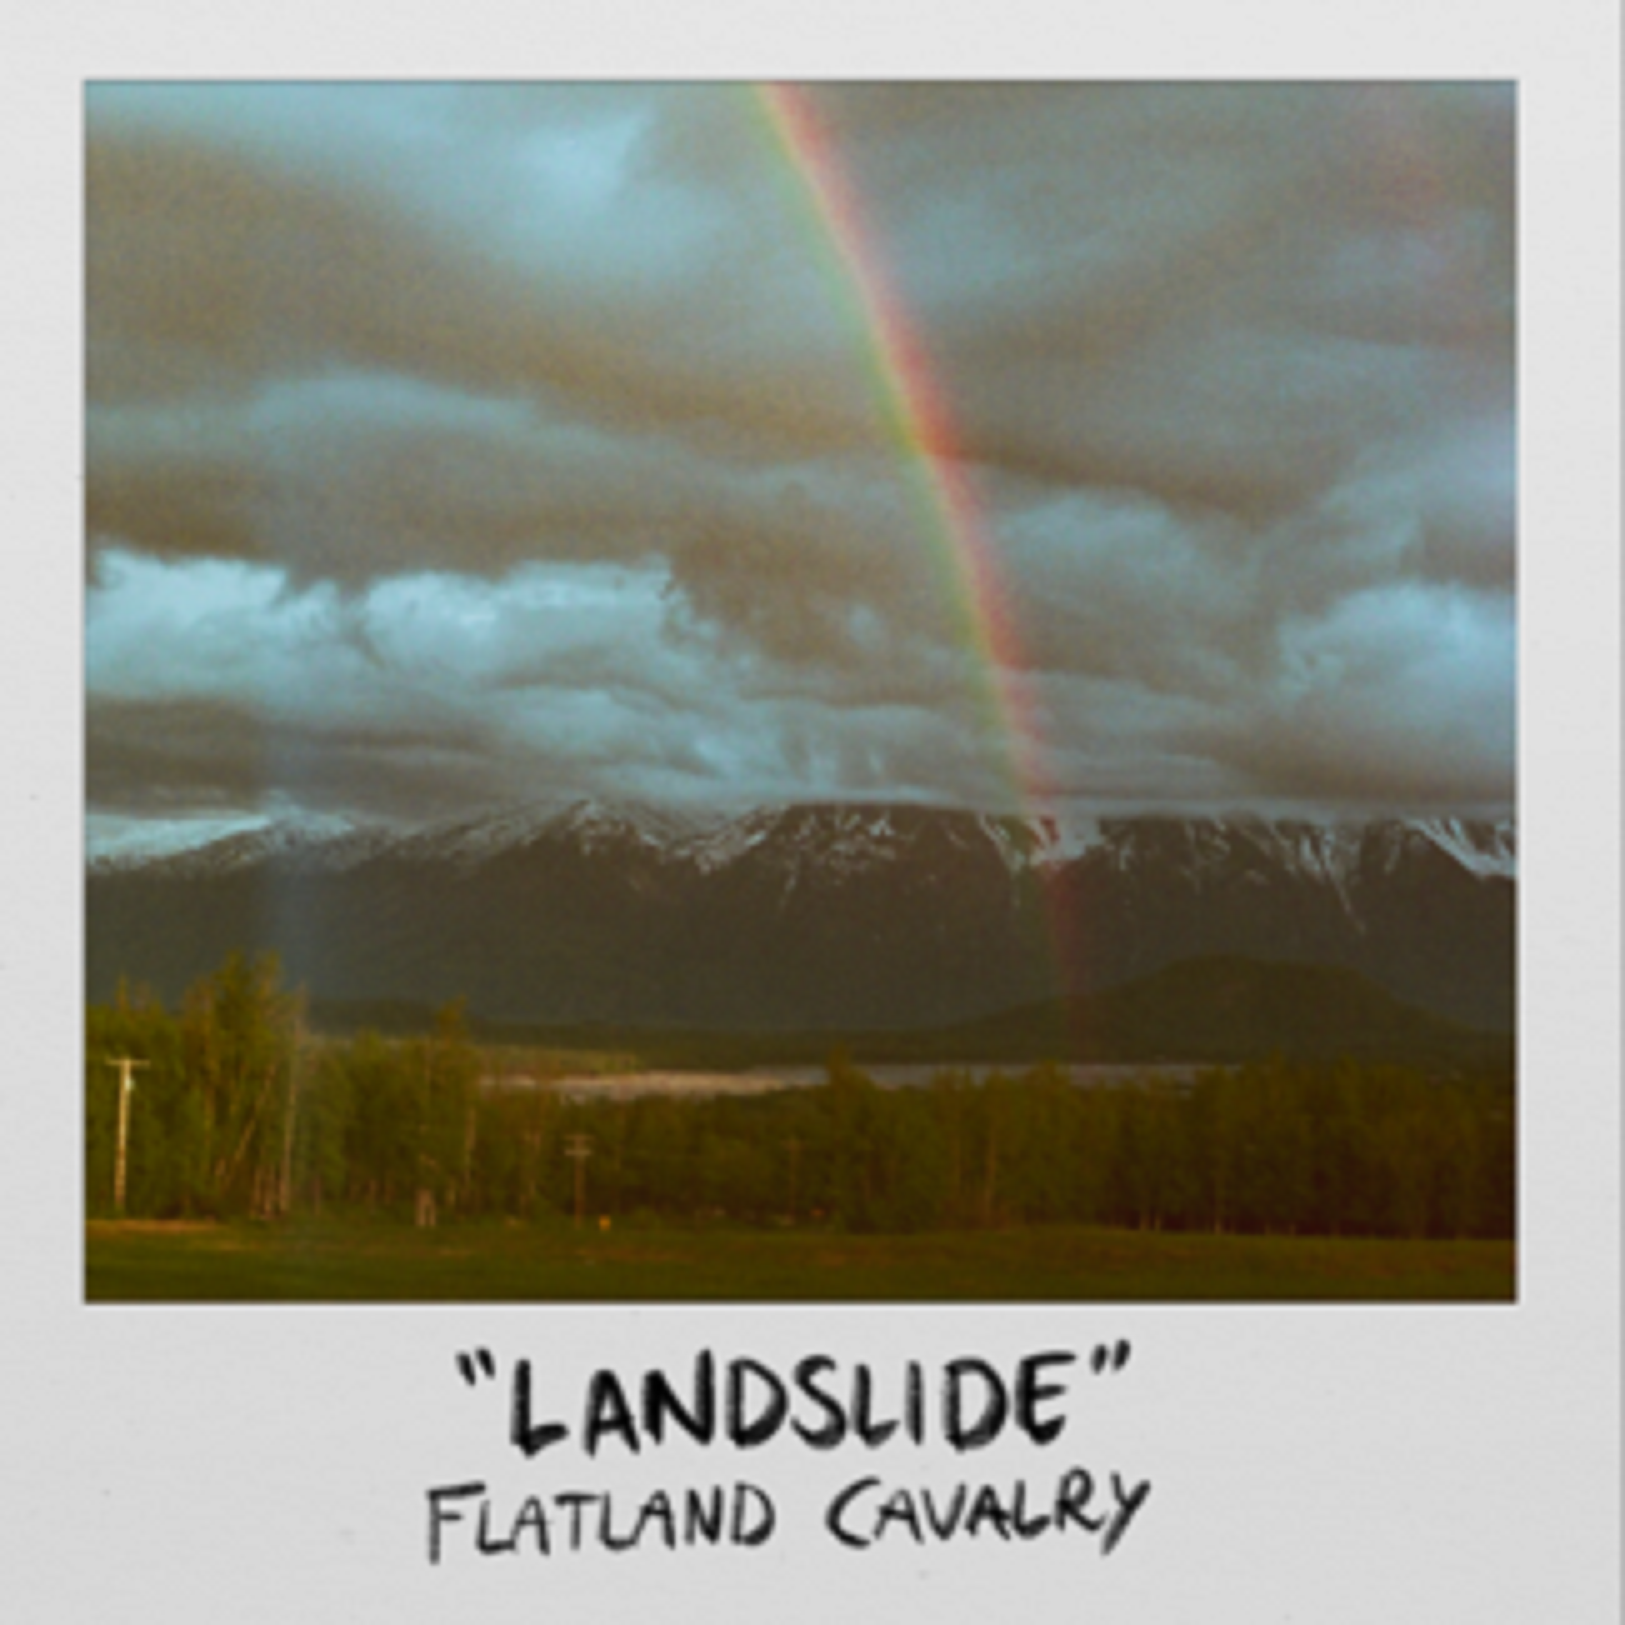 Flatland Cavalry release two new versions of “Landslide," studio recording and “Landslide (Live at the Ryman)” out now